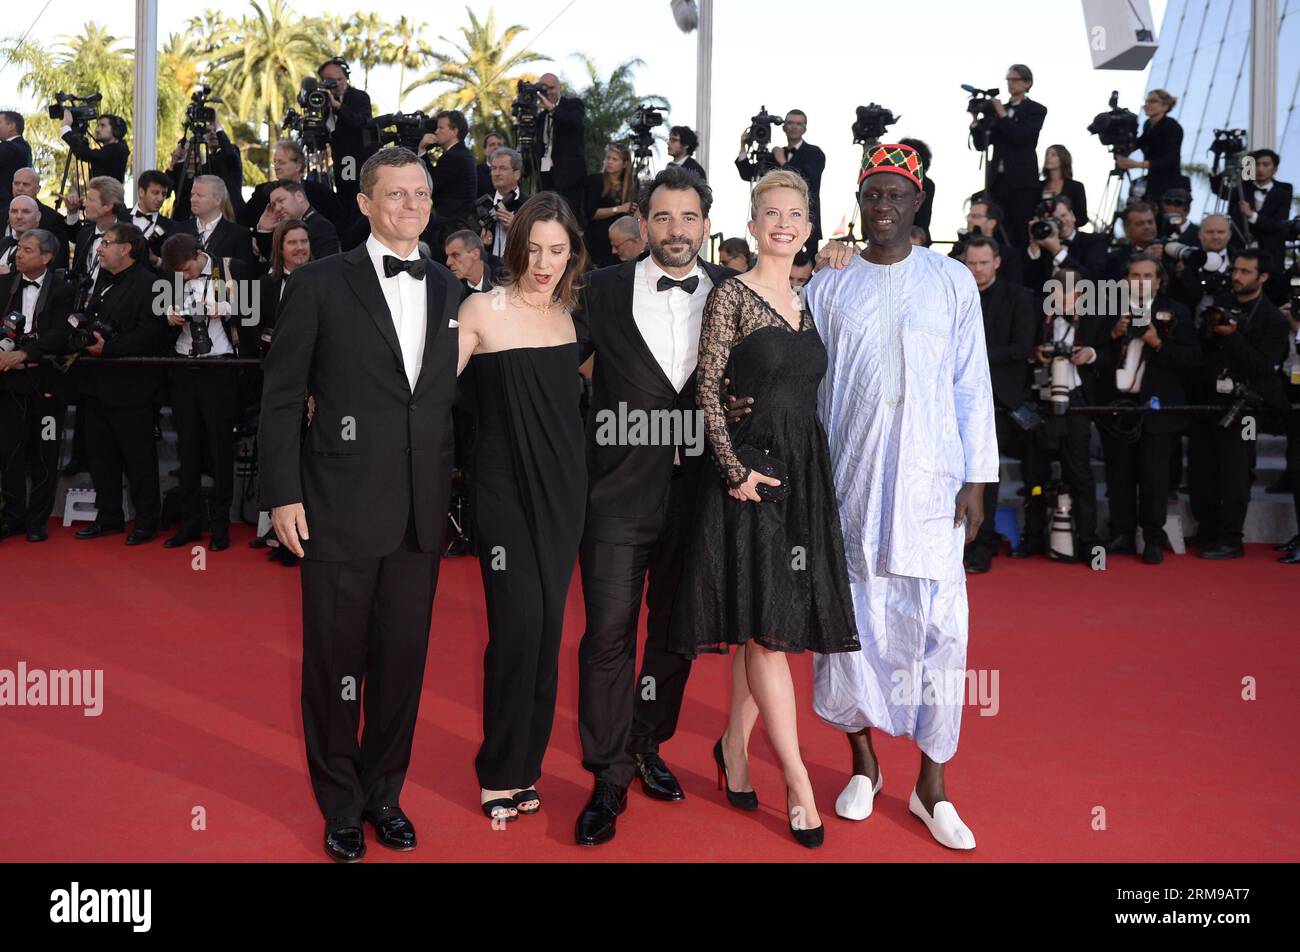 (140515) -- CANNES, May 15, 2014 (Xinhua) -- President of the Criterion Collection Peter Becker, French actress Geraldine Pailhas, Argentinian director Pablo Trapero, Norwegian-Swedish actress Maria Bonnevie and Senegalese director Moussa Toure (from L to R) arrive for the screening of Mr Turner during the 67th Cannes Film Festival, in Cannes, France, May 15, 2014. The movie is presented in the Official Competition of the festival which runs from May 14 to 25. (Xinhua/Ye Pingfan) FRANCE-CANNES-FILM FESTIVAL-MR TURNER-RED CARPET PUBLICATIONxNOTxINxCHN   Cannes May 15 2014 XINHUA President of Th Stock Photo